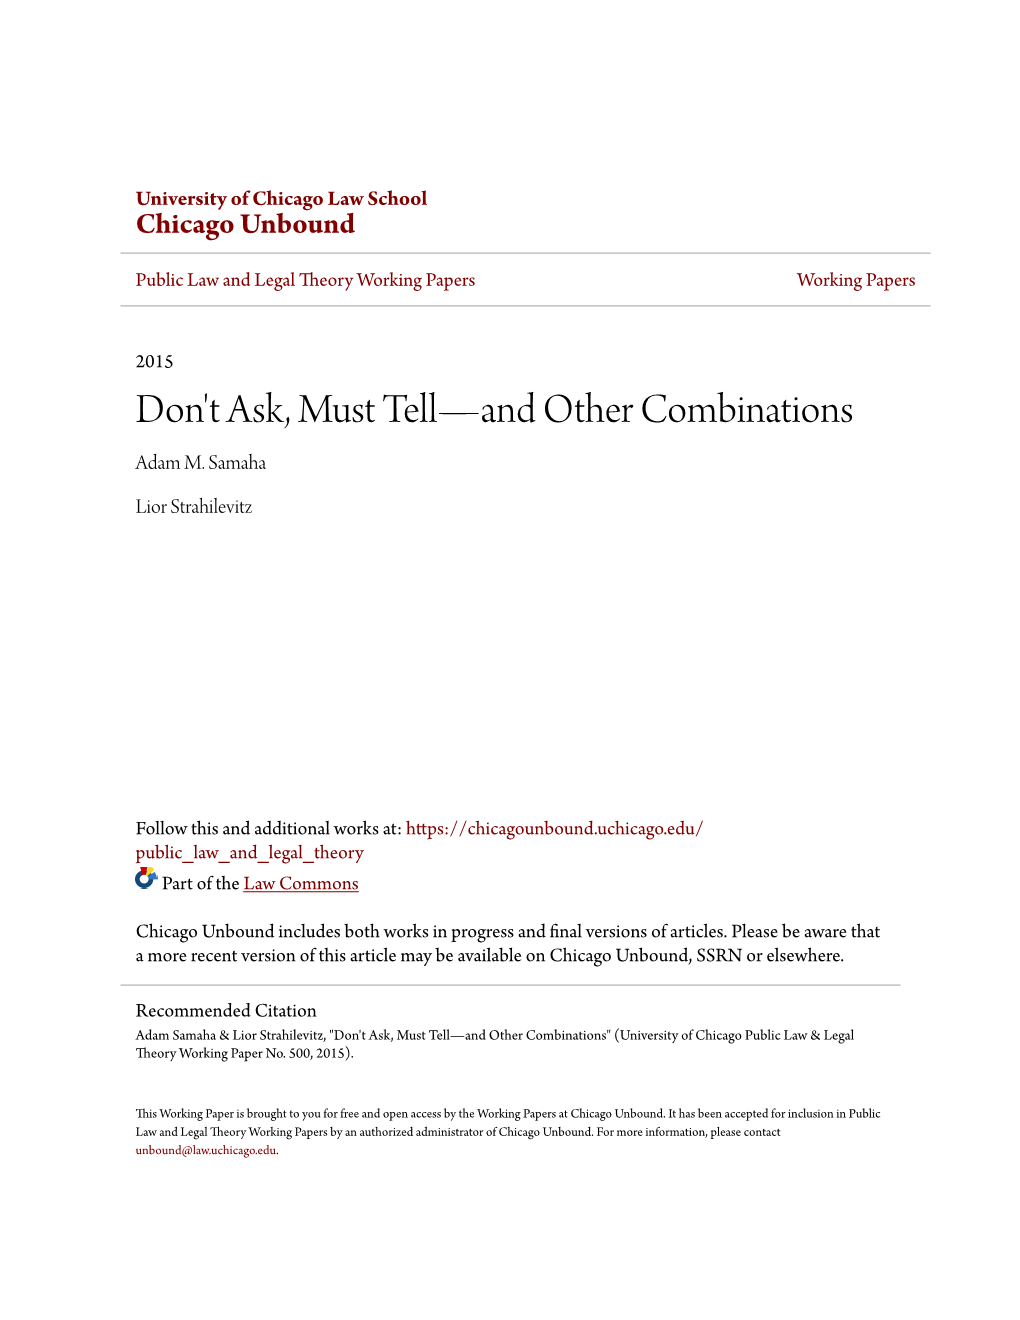 Don't Ask, Must Tell—And Other Combinations Adam M